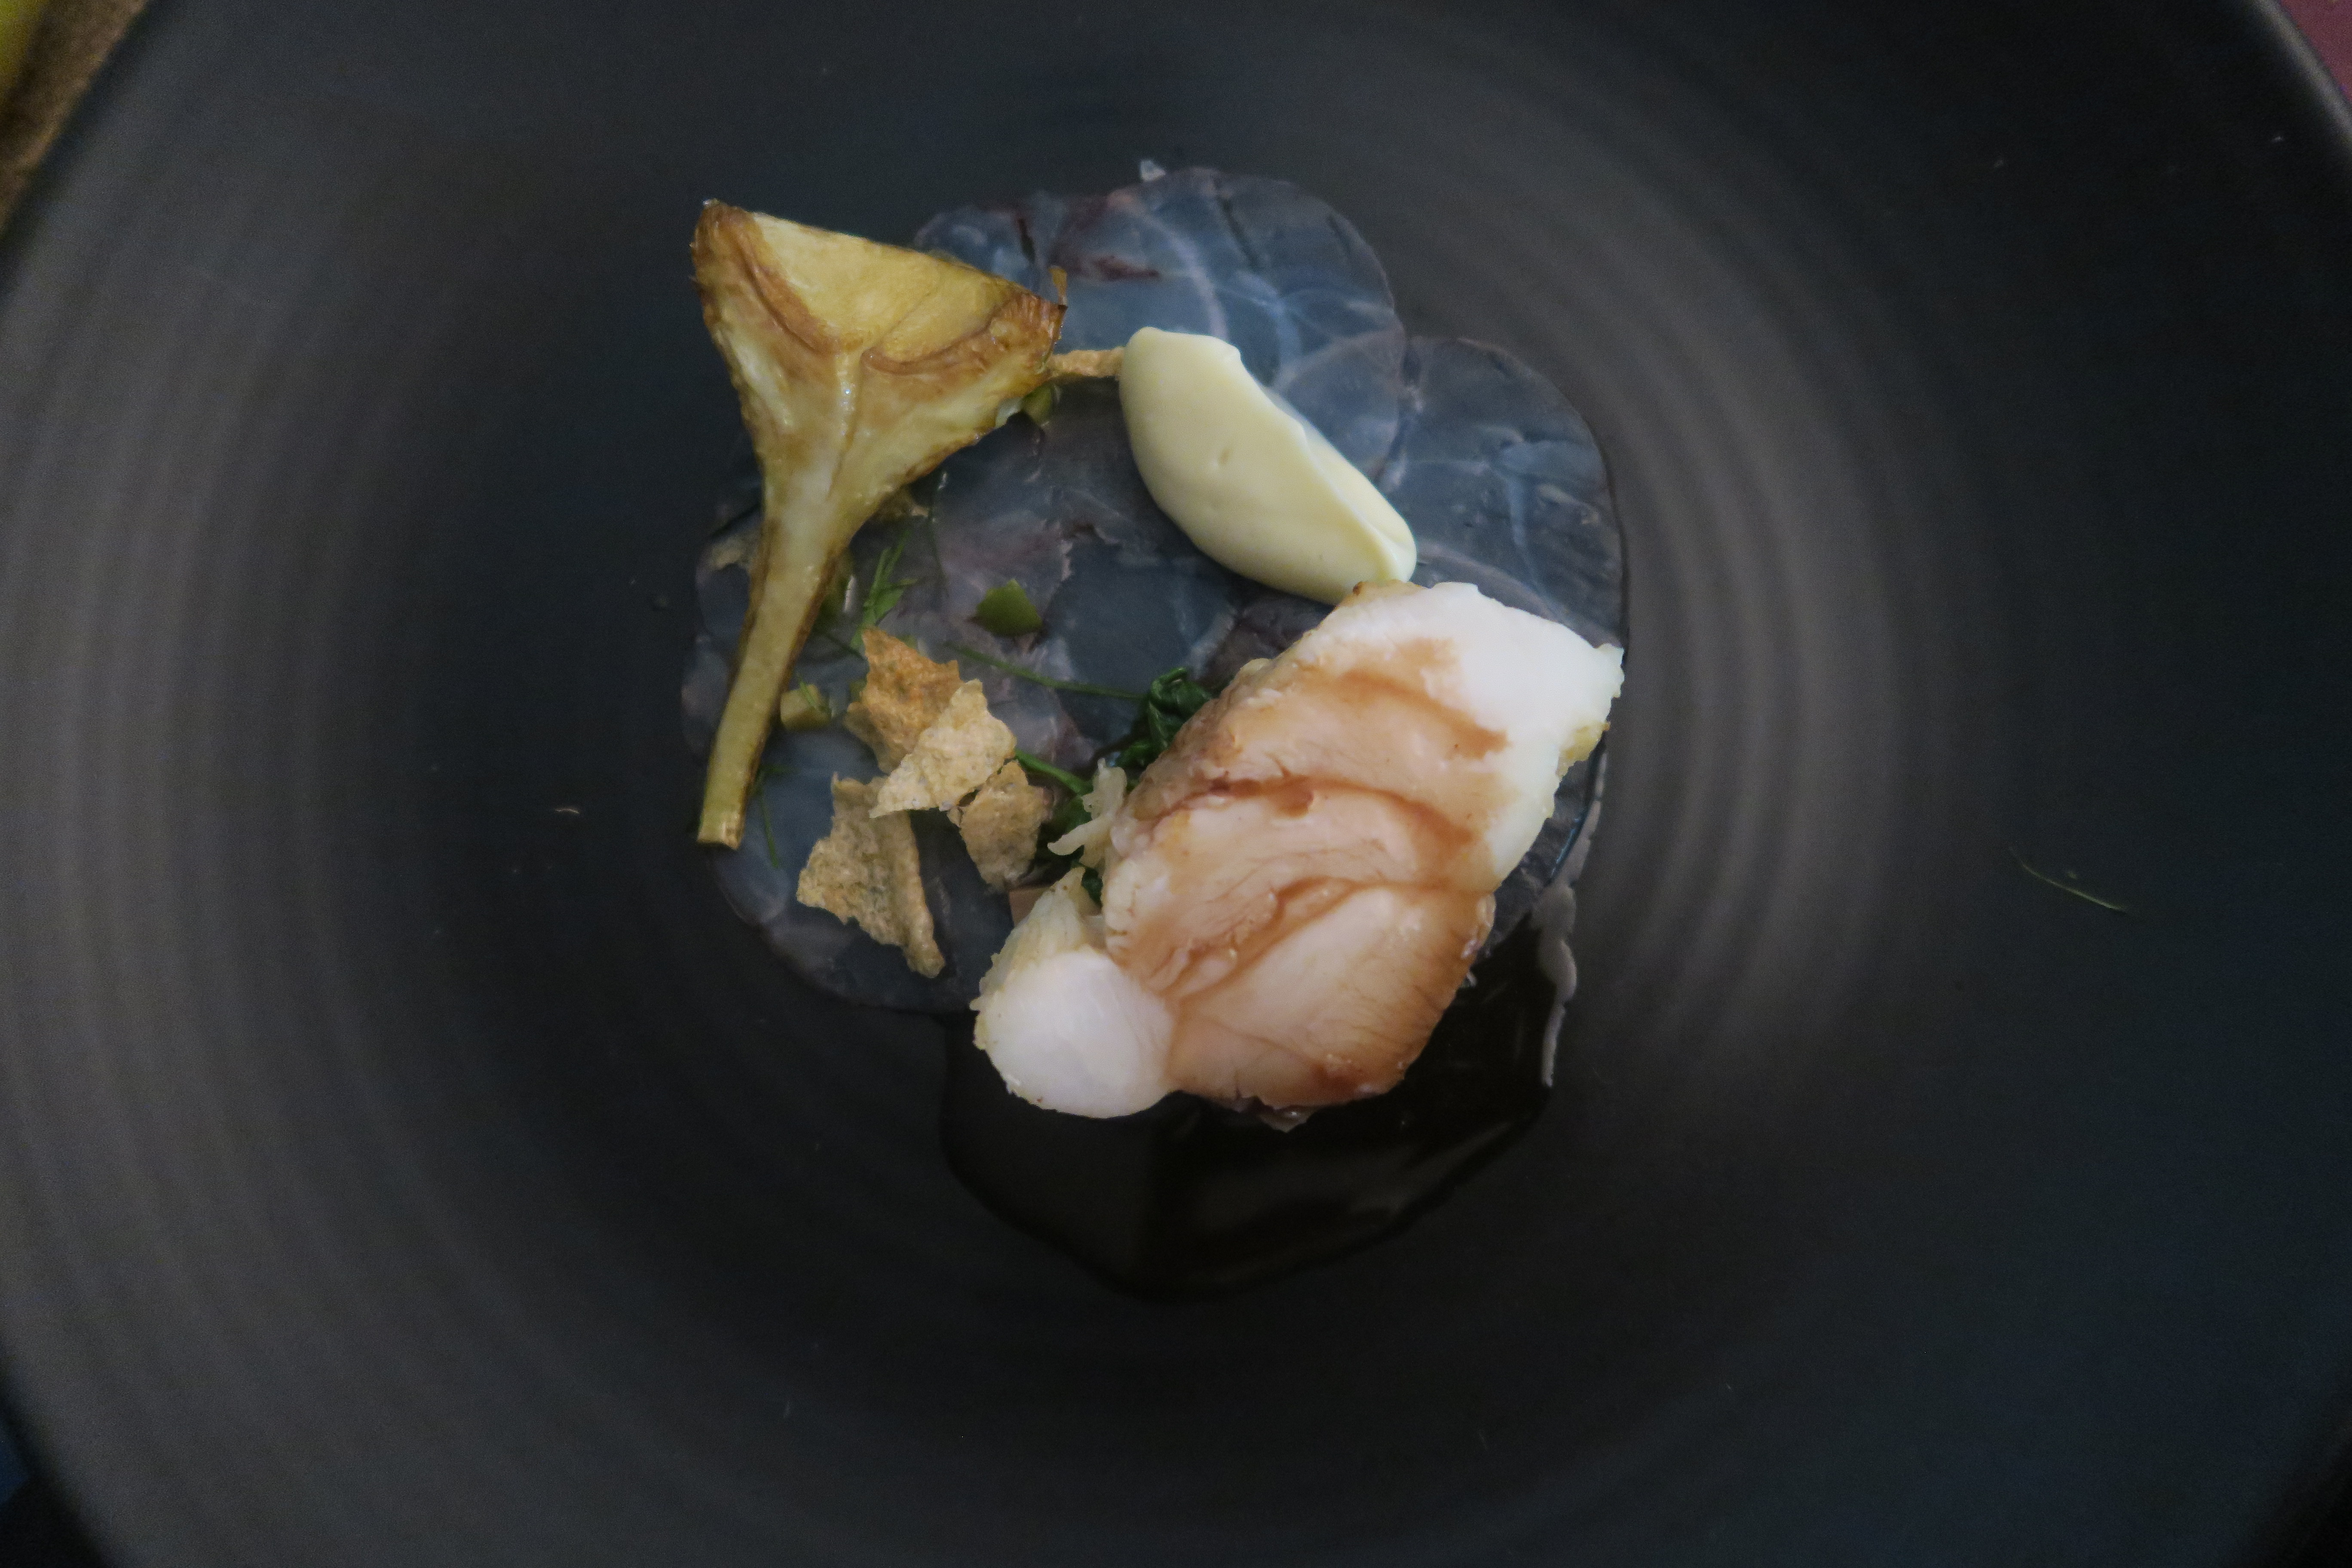 Roasted Cornish monkfish, artichoke, olive and coriander by chef Mark Abbott, Fine Dining is not Dying, PX Plus Festival